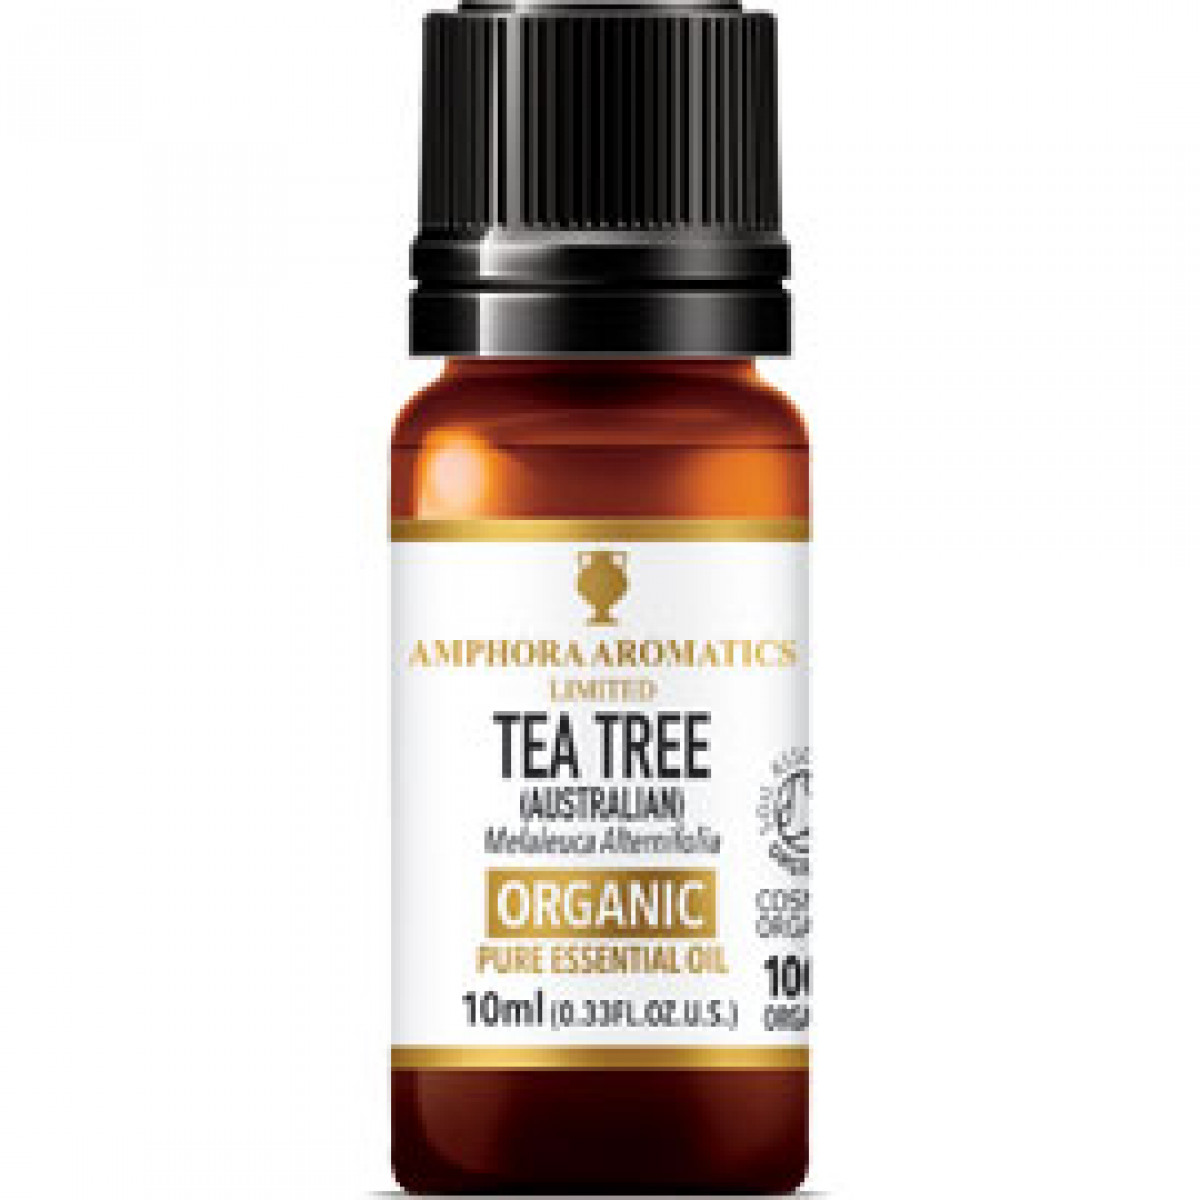 Product picture for Tea Tree Oil